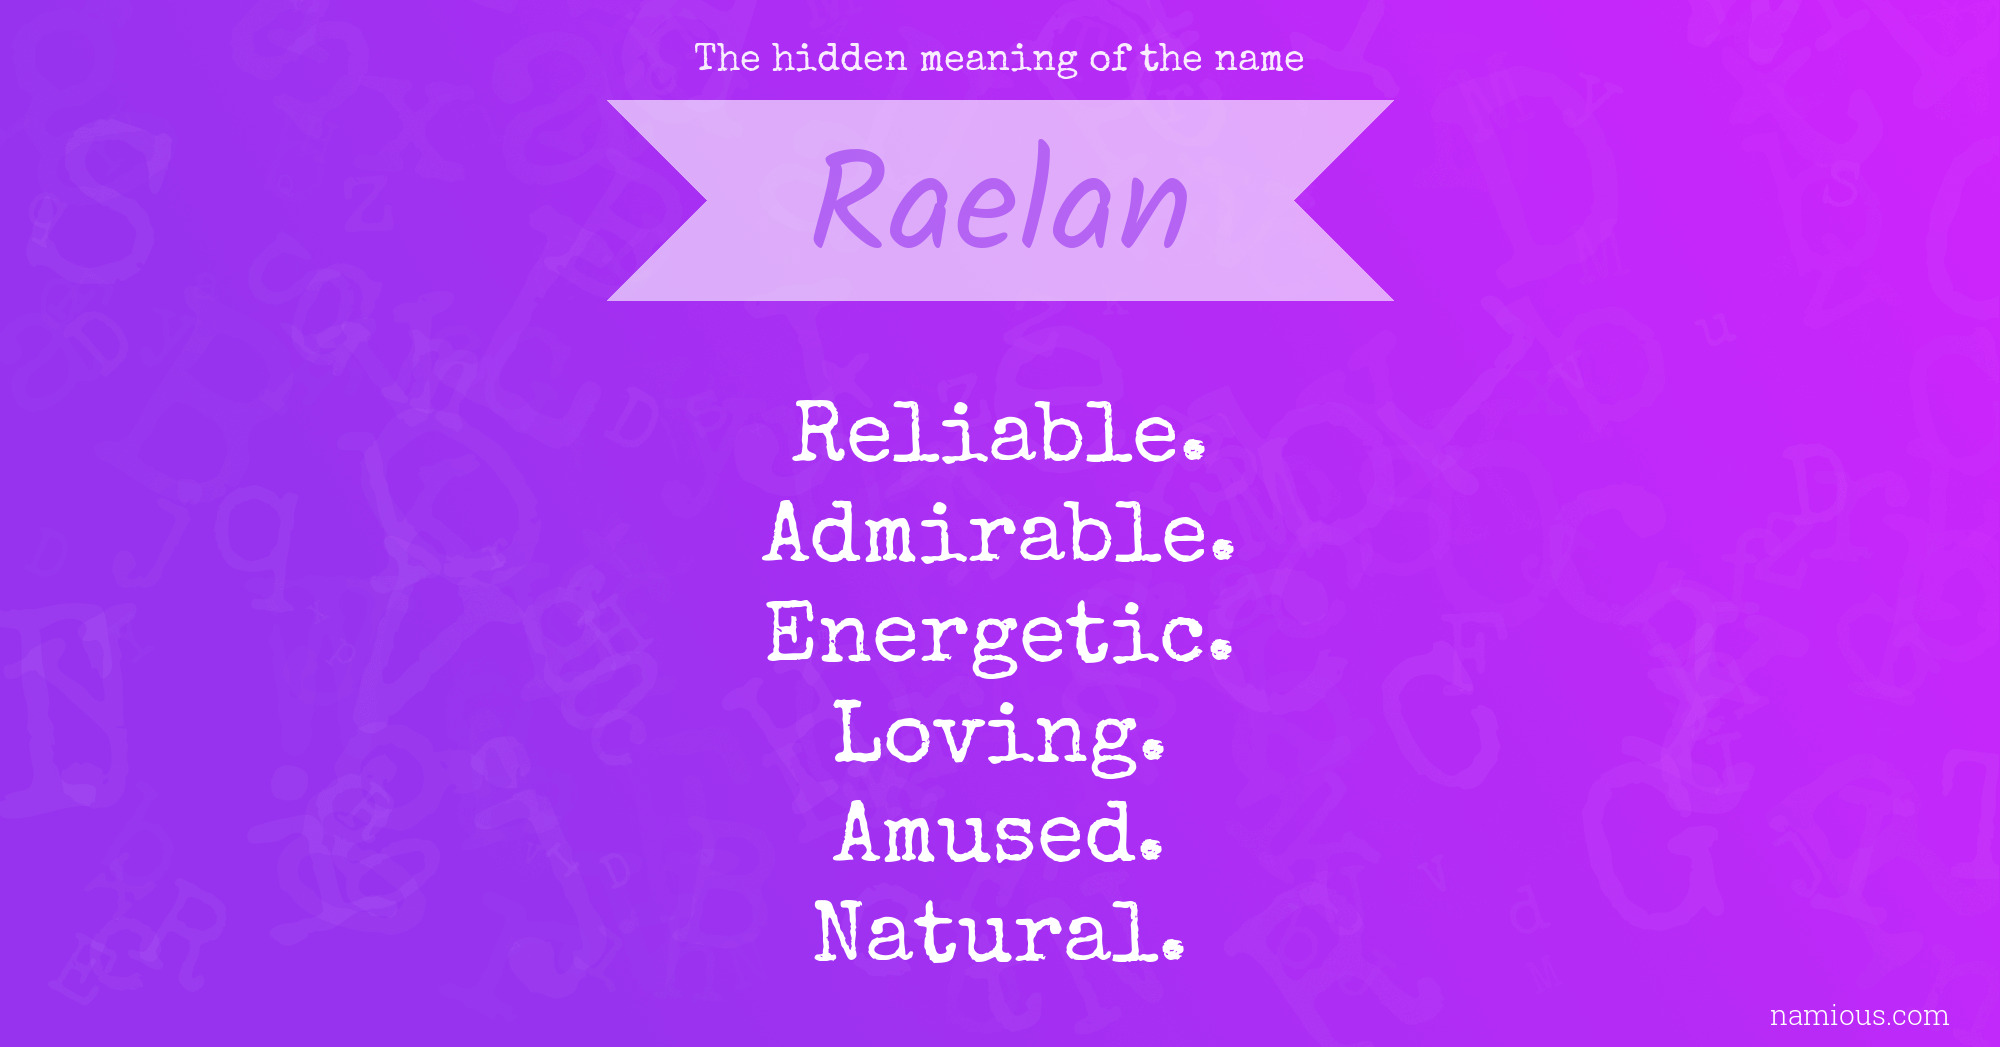 The hidden meaning of the name Raelan